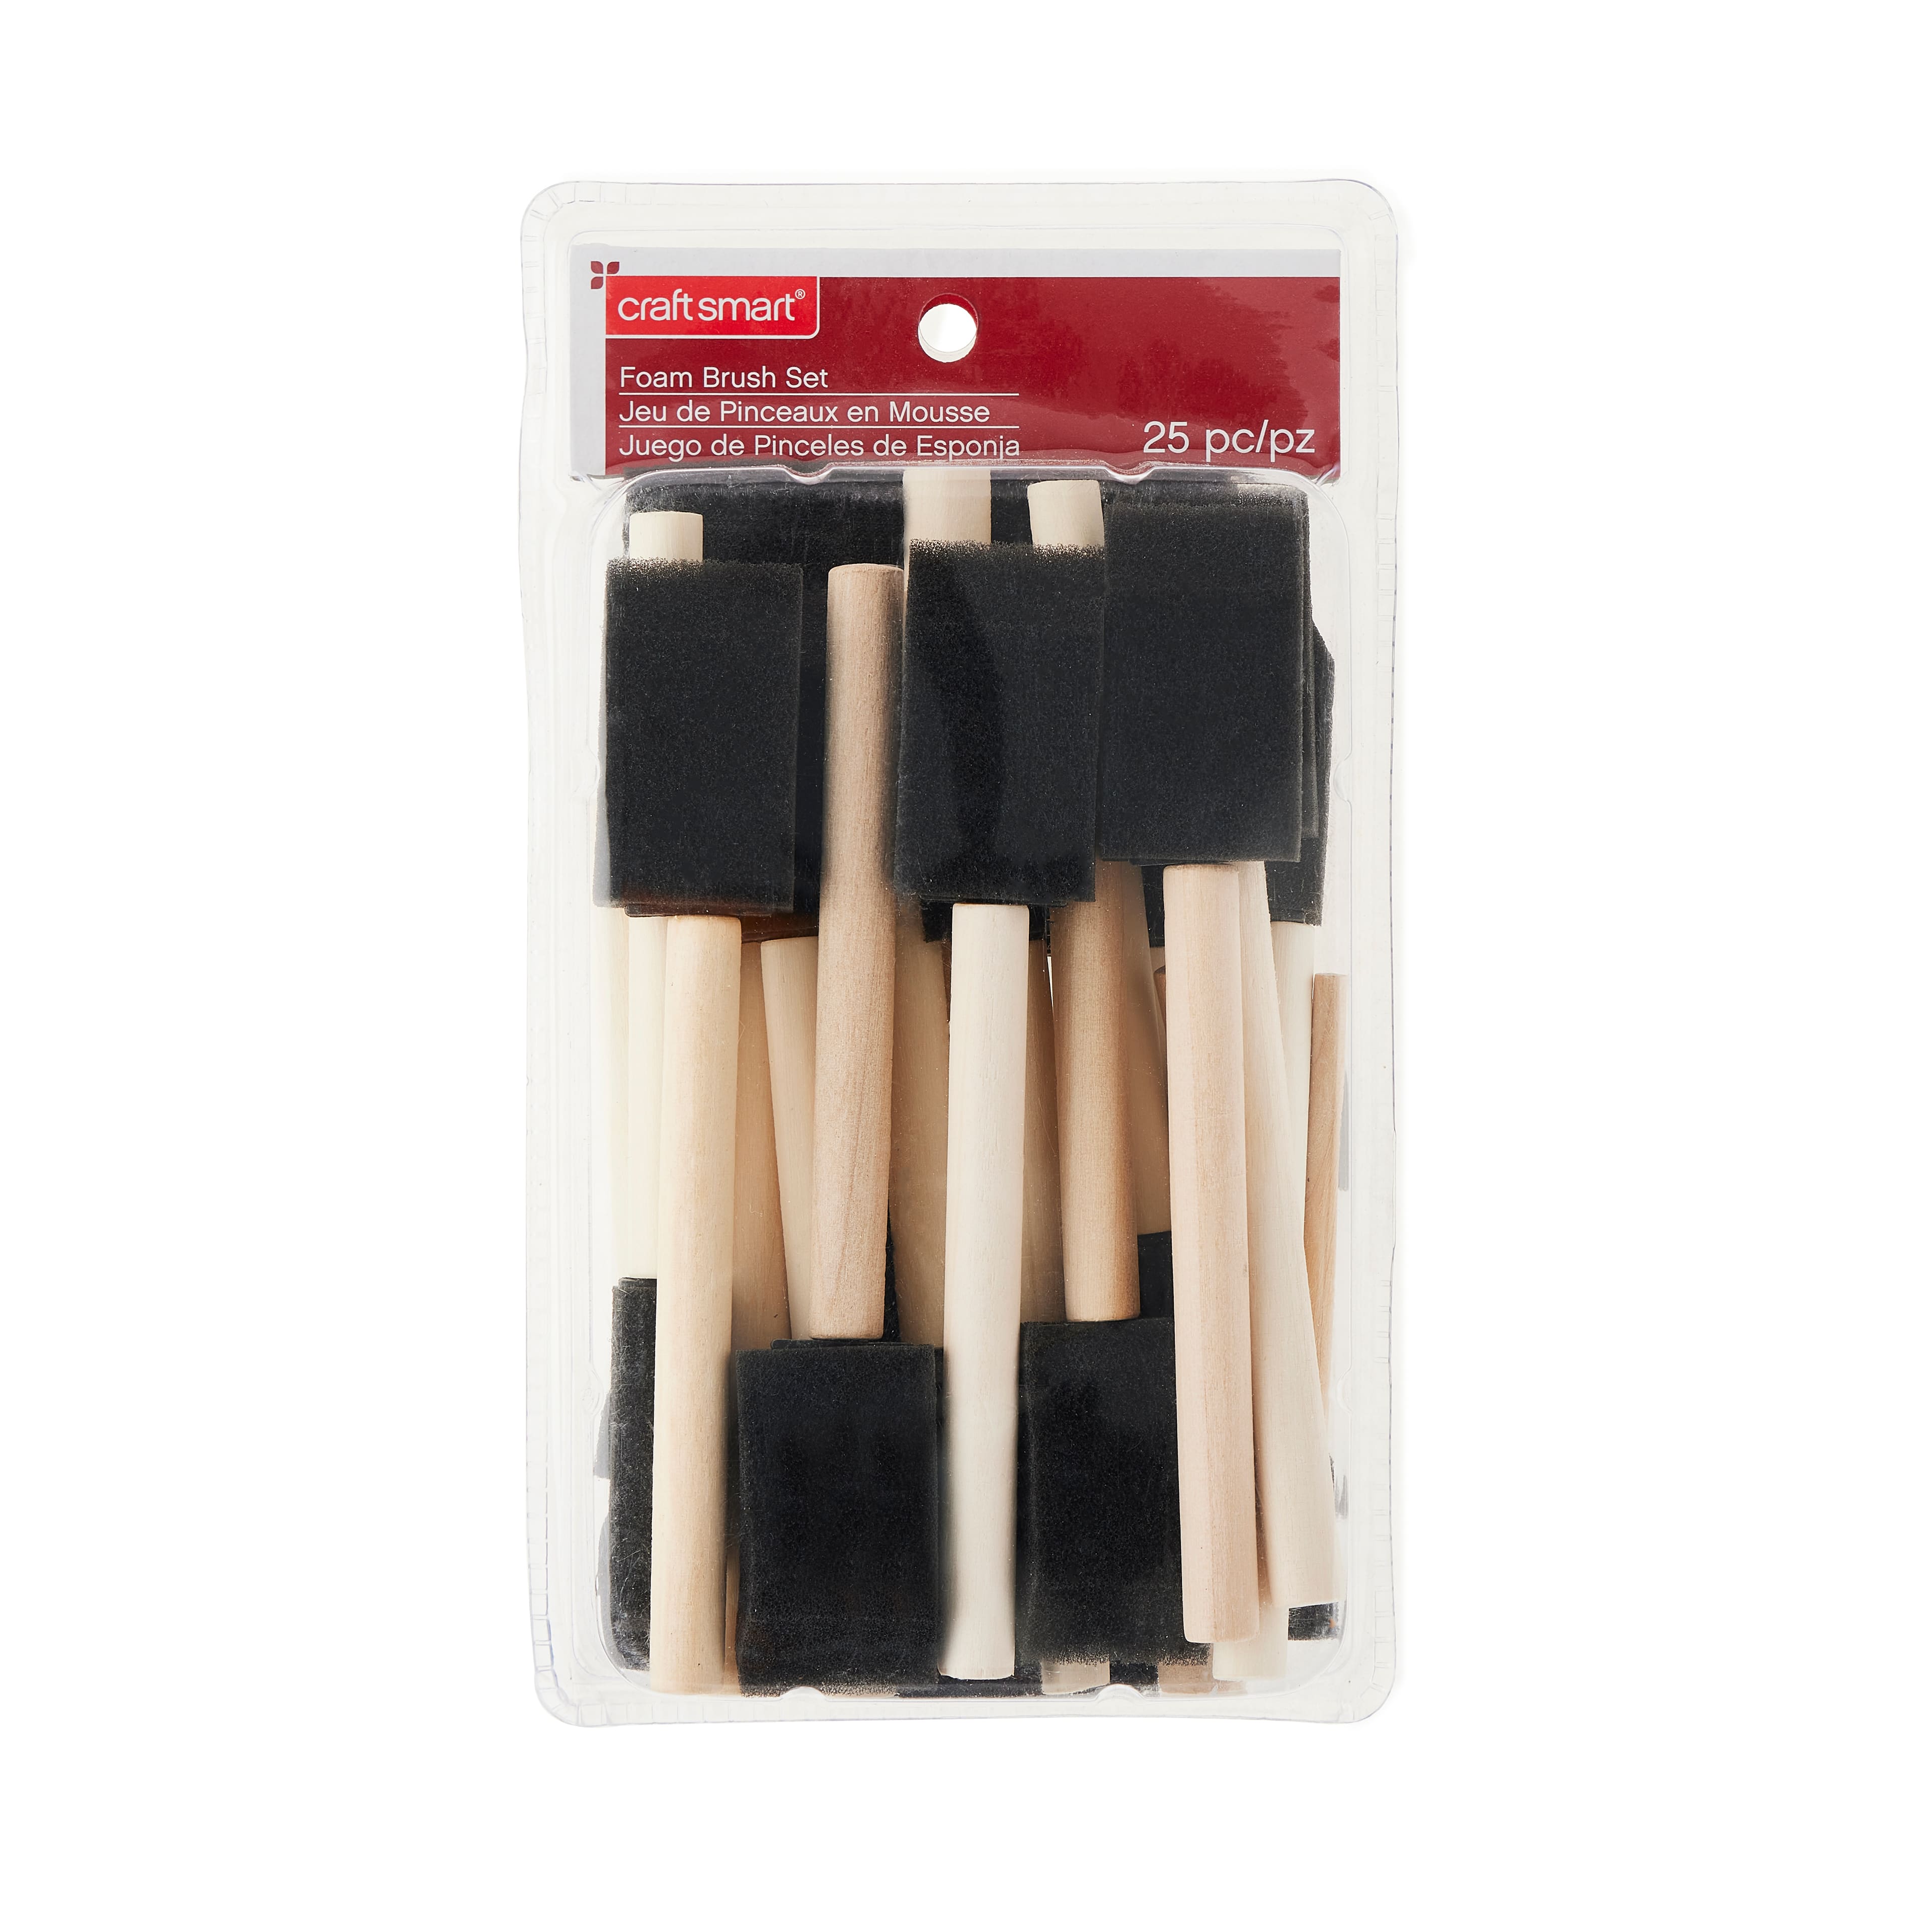  Arteza Foam Paint Brushes, Includes 50 Sponge Brushes, 25 x 1  Inch Brushes and 25 x 2 Inch Brushes, Art Supplies for Painting, DIY, and  Wood Staining : Arts, Crafts & Sewing